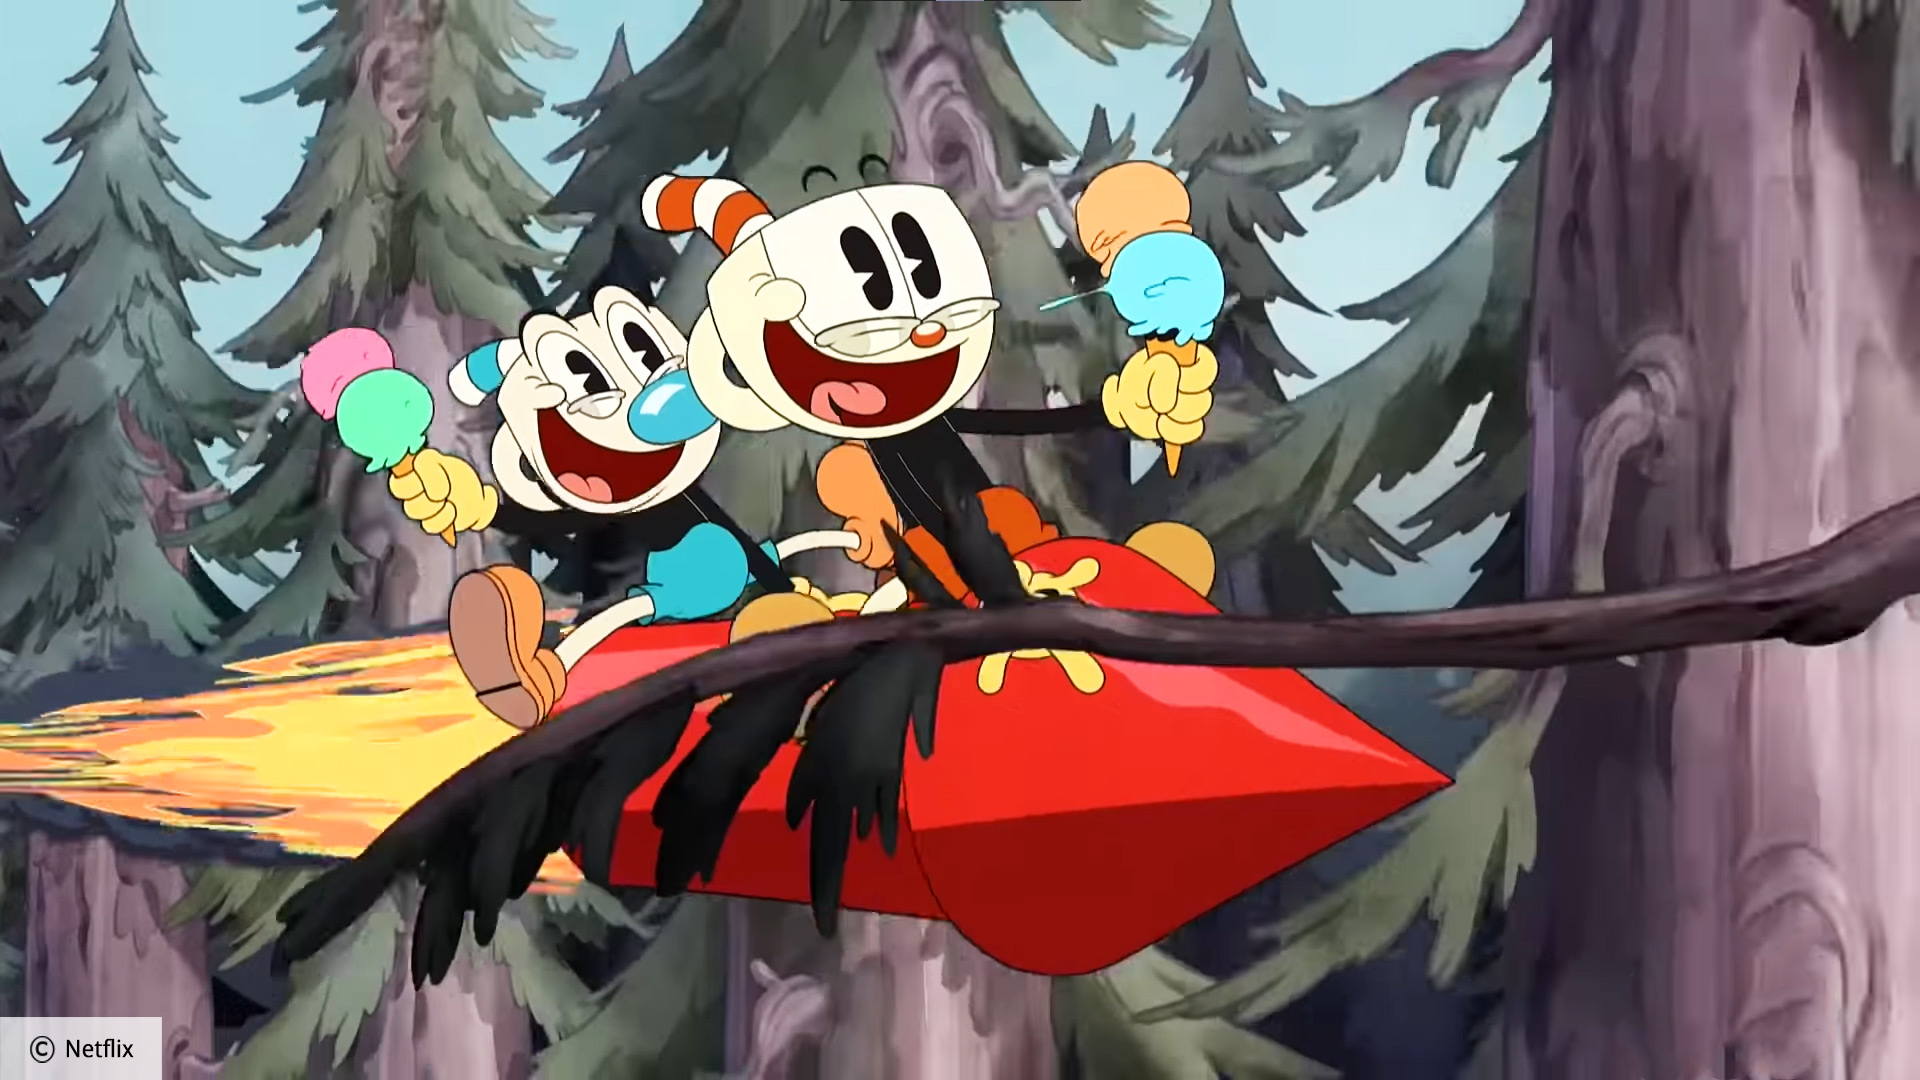 The Cuphead Show premieres in February, debut trailer